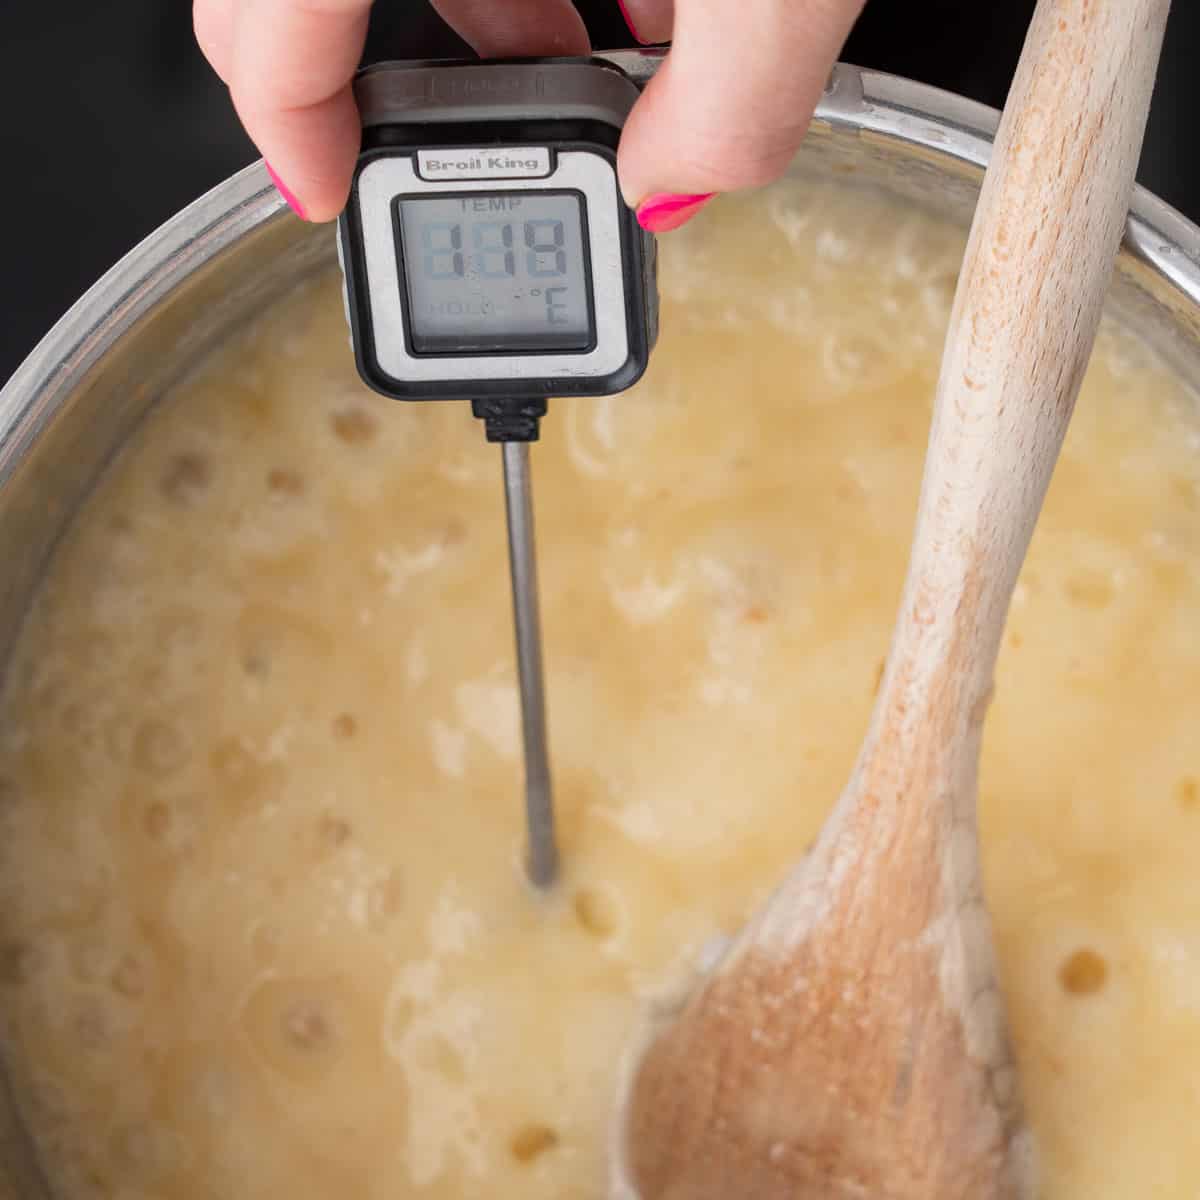 Fudge mixture brought to a bubbling in a saucepan on the bench element with a wooden spoon resting on the side and a thermometer taking the temperature